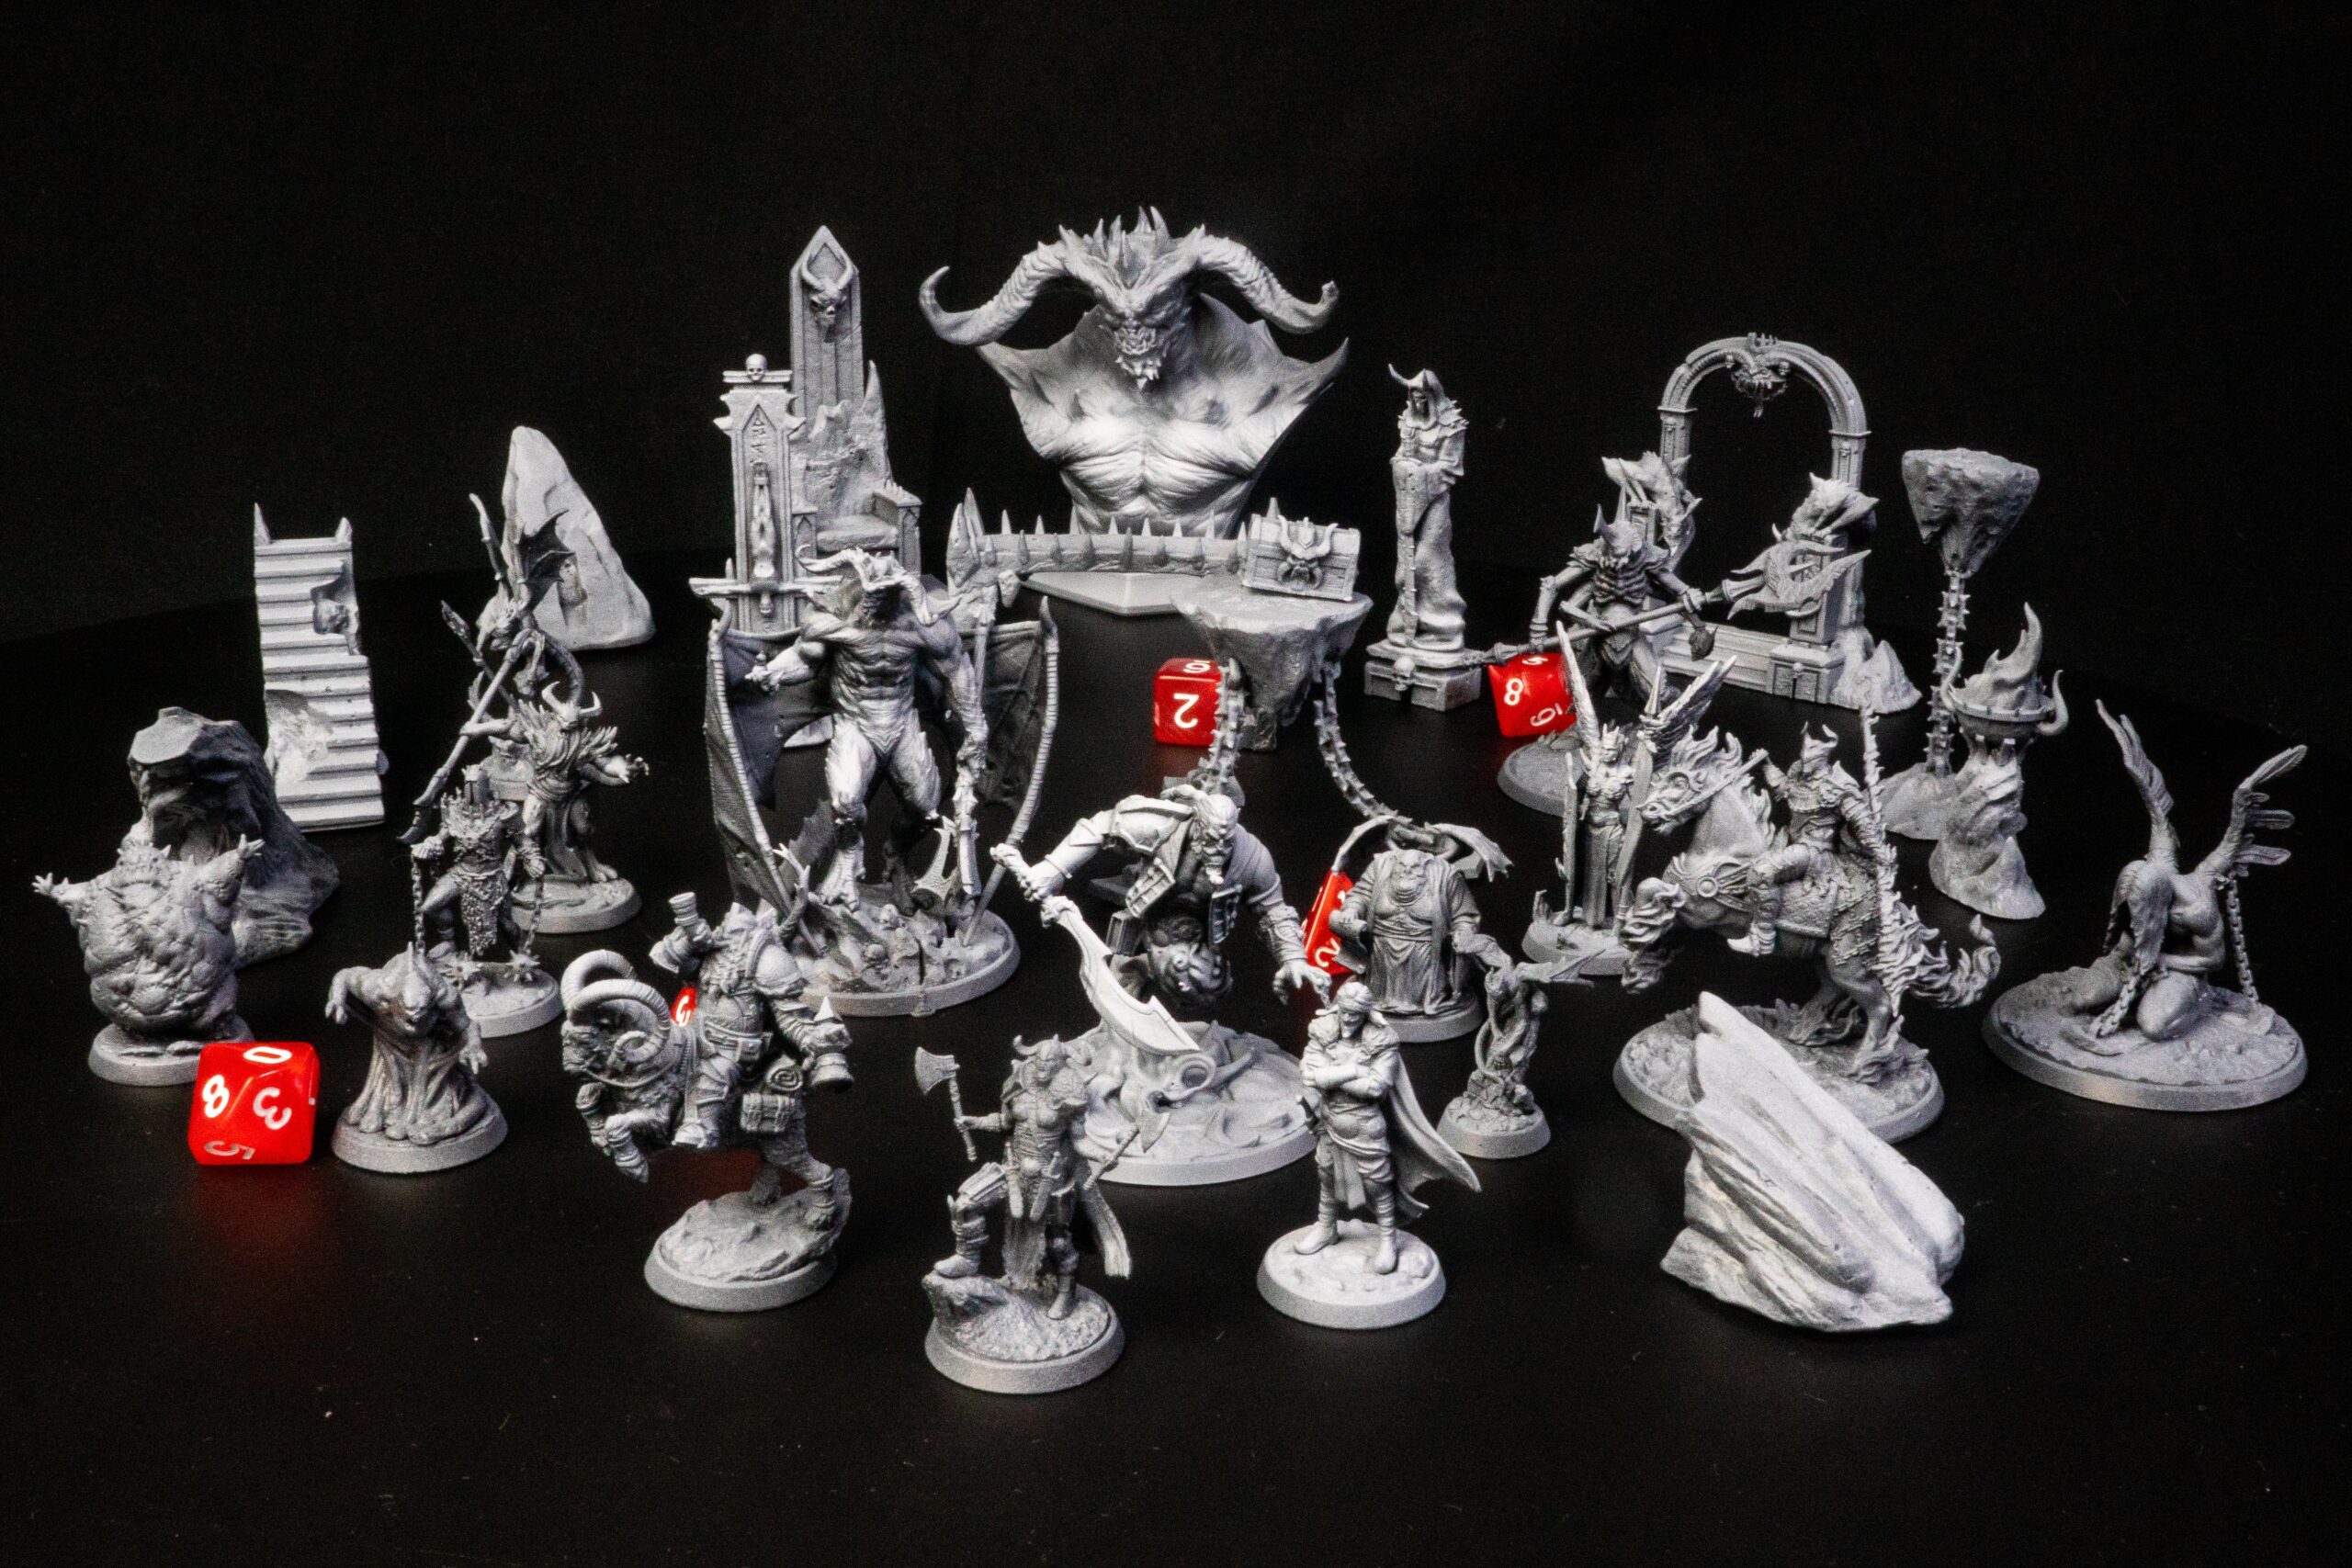 how to choose the best resin for printing miniatures